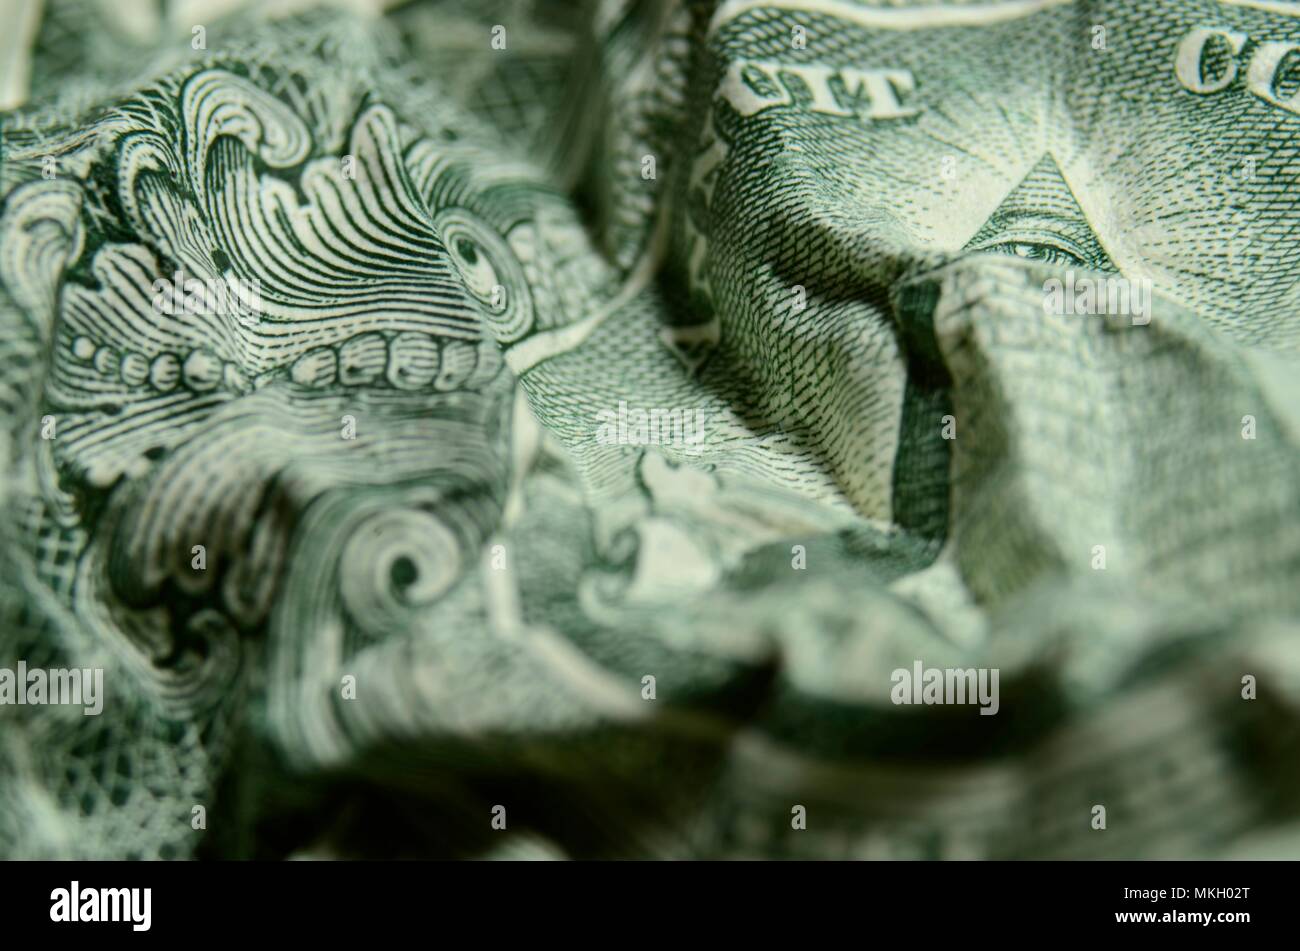 Eye of providence, from the great seal, on the American dollar bill, spying. Stock Photo